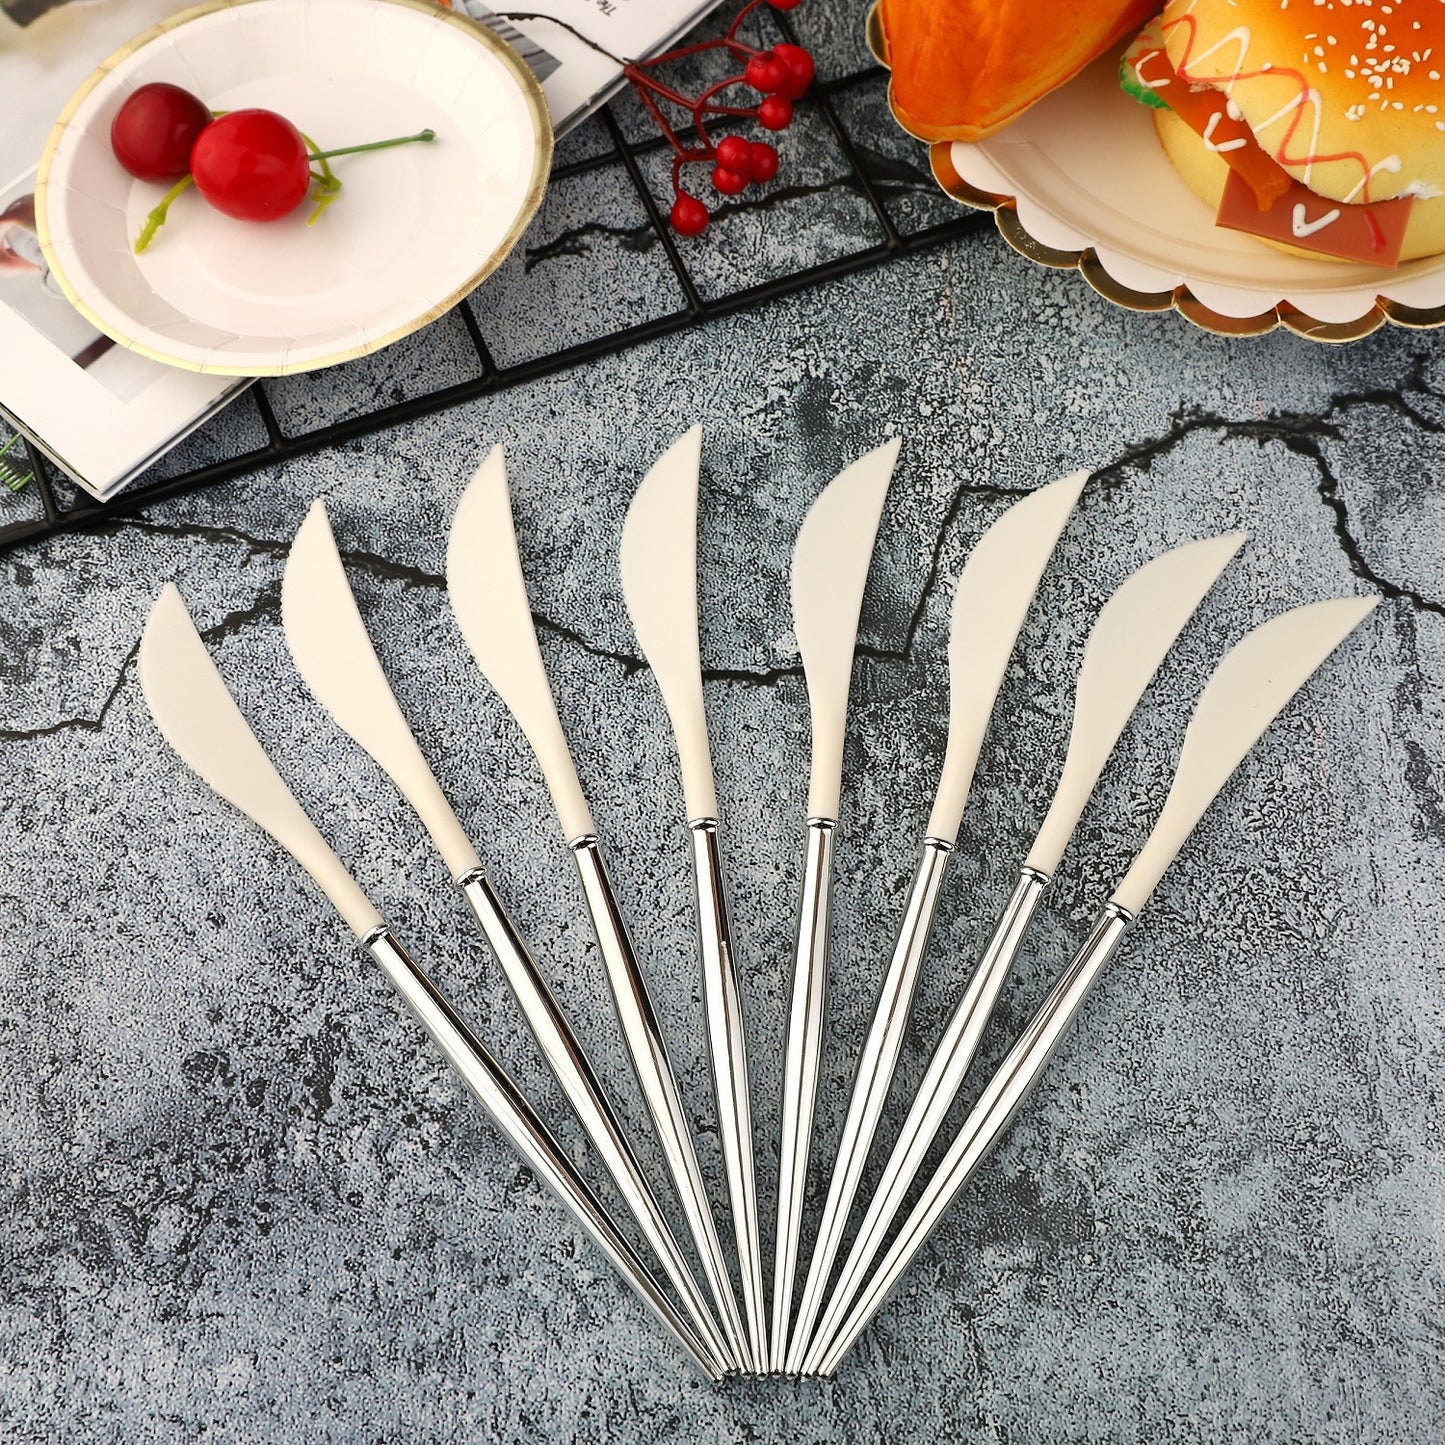 HOT 2023 Silver White Disposable Cutlery 20cm Plastic Knife Forks Spoons Party Supplies Decoration For Camping BBQ Wedding Outdoor Birthday